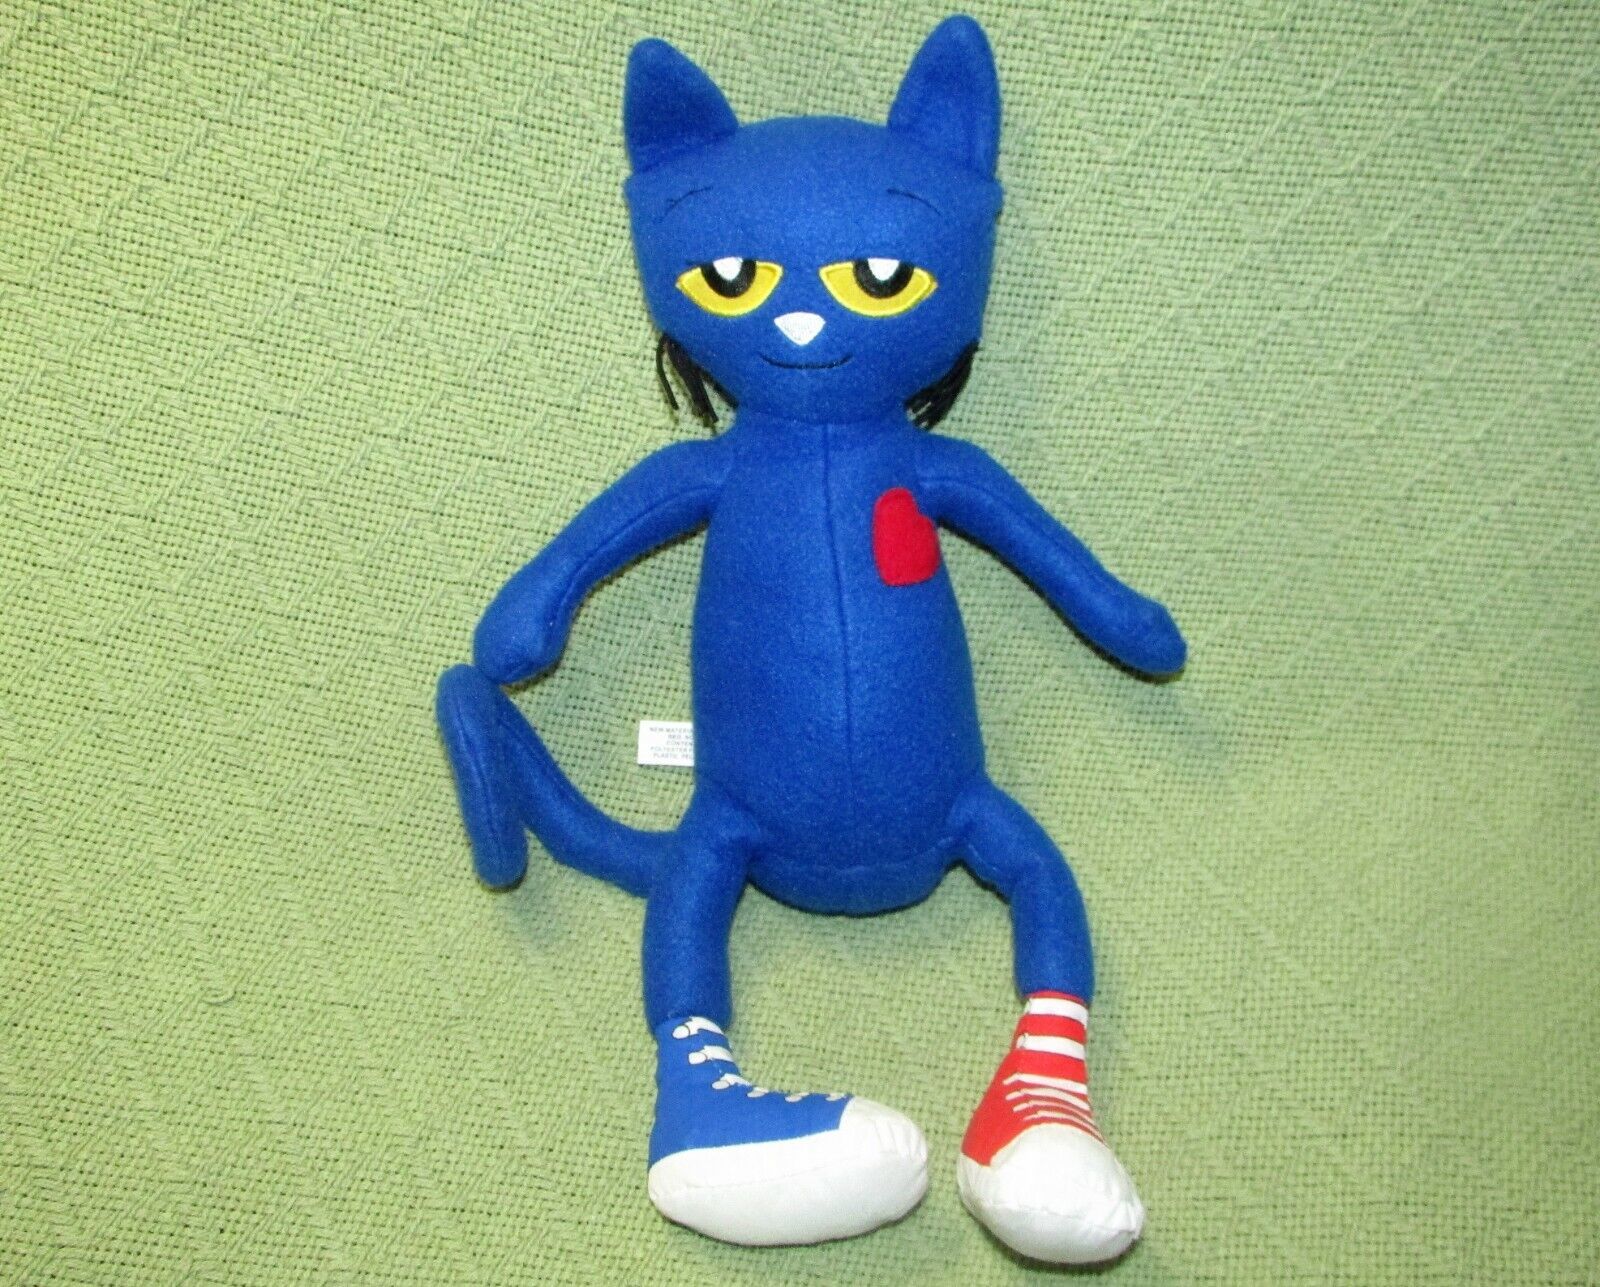 13" PETE THE CAT PLUSH MERRYMAKERS DOLL 2010 BLUE WITH RED HEART STUFFED ANIMAL - $22.50